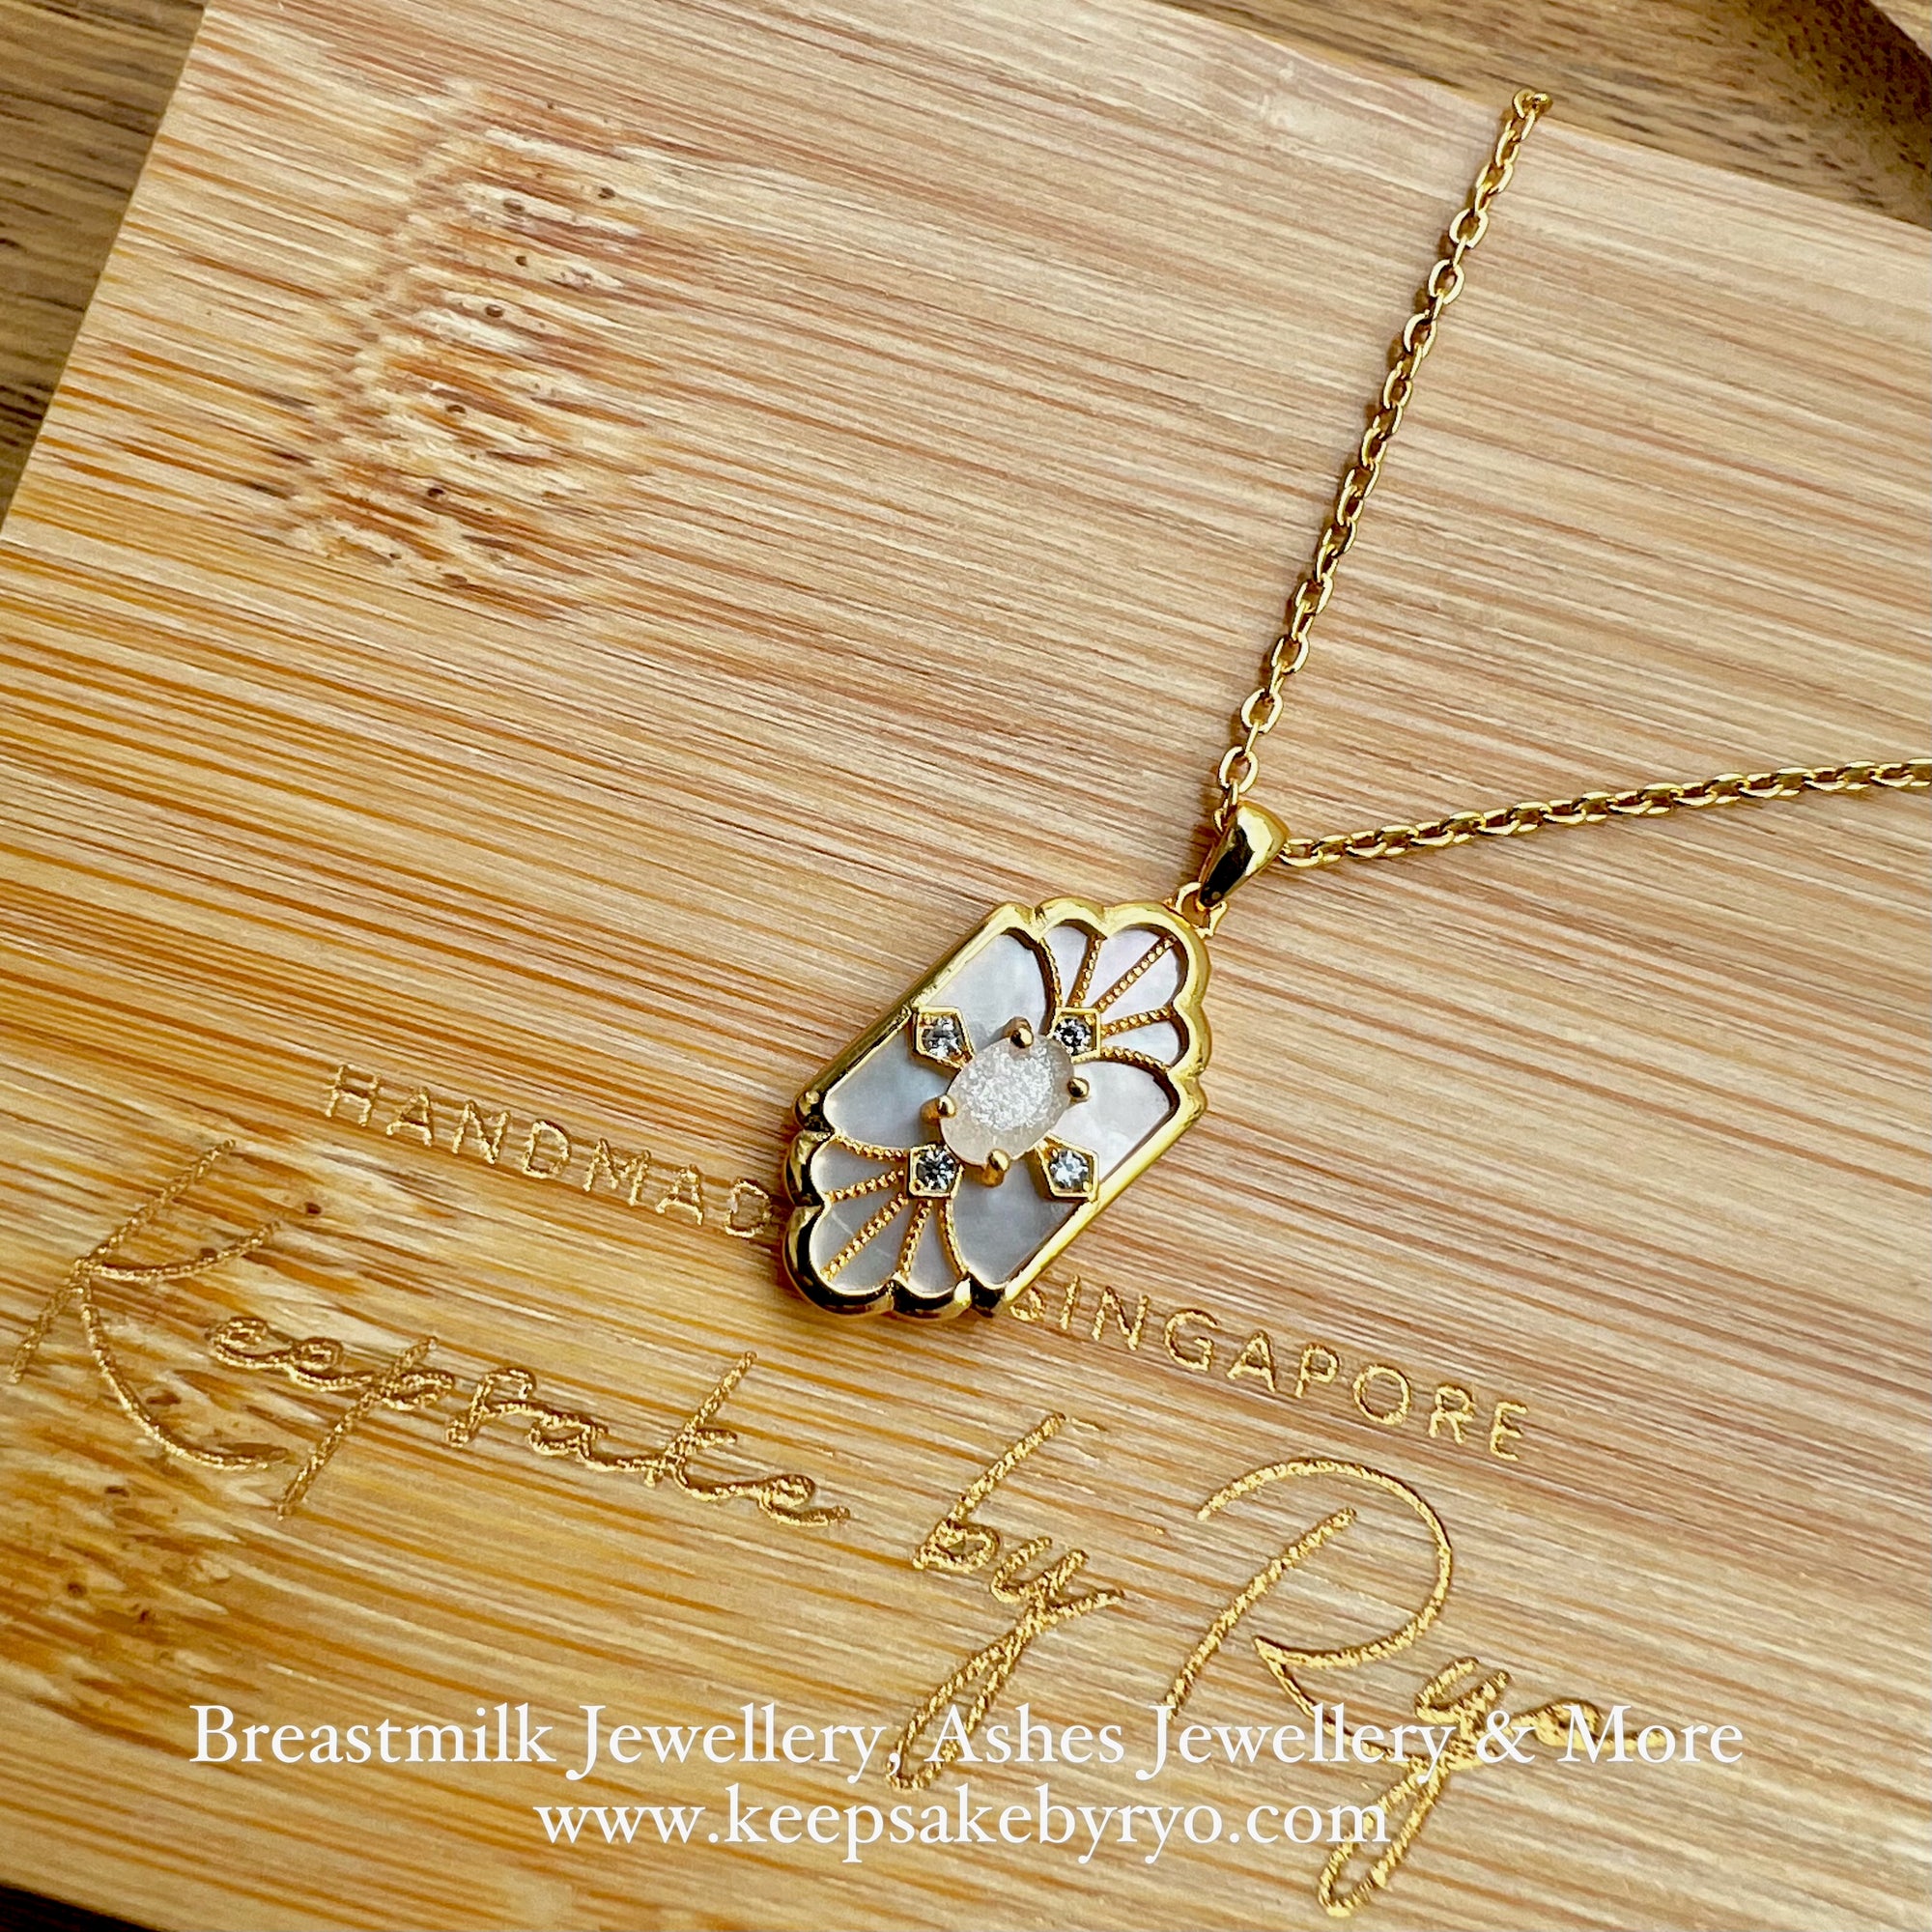 SOLITAIRE: MARIE MOTHER OF PEARL PENDANT WITH OVAL SHAPED SOLITAIRE